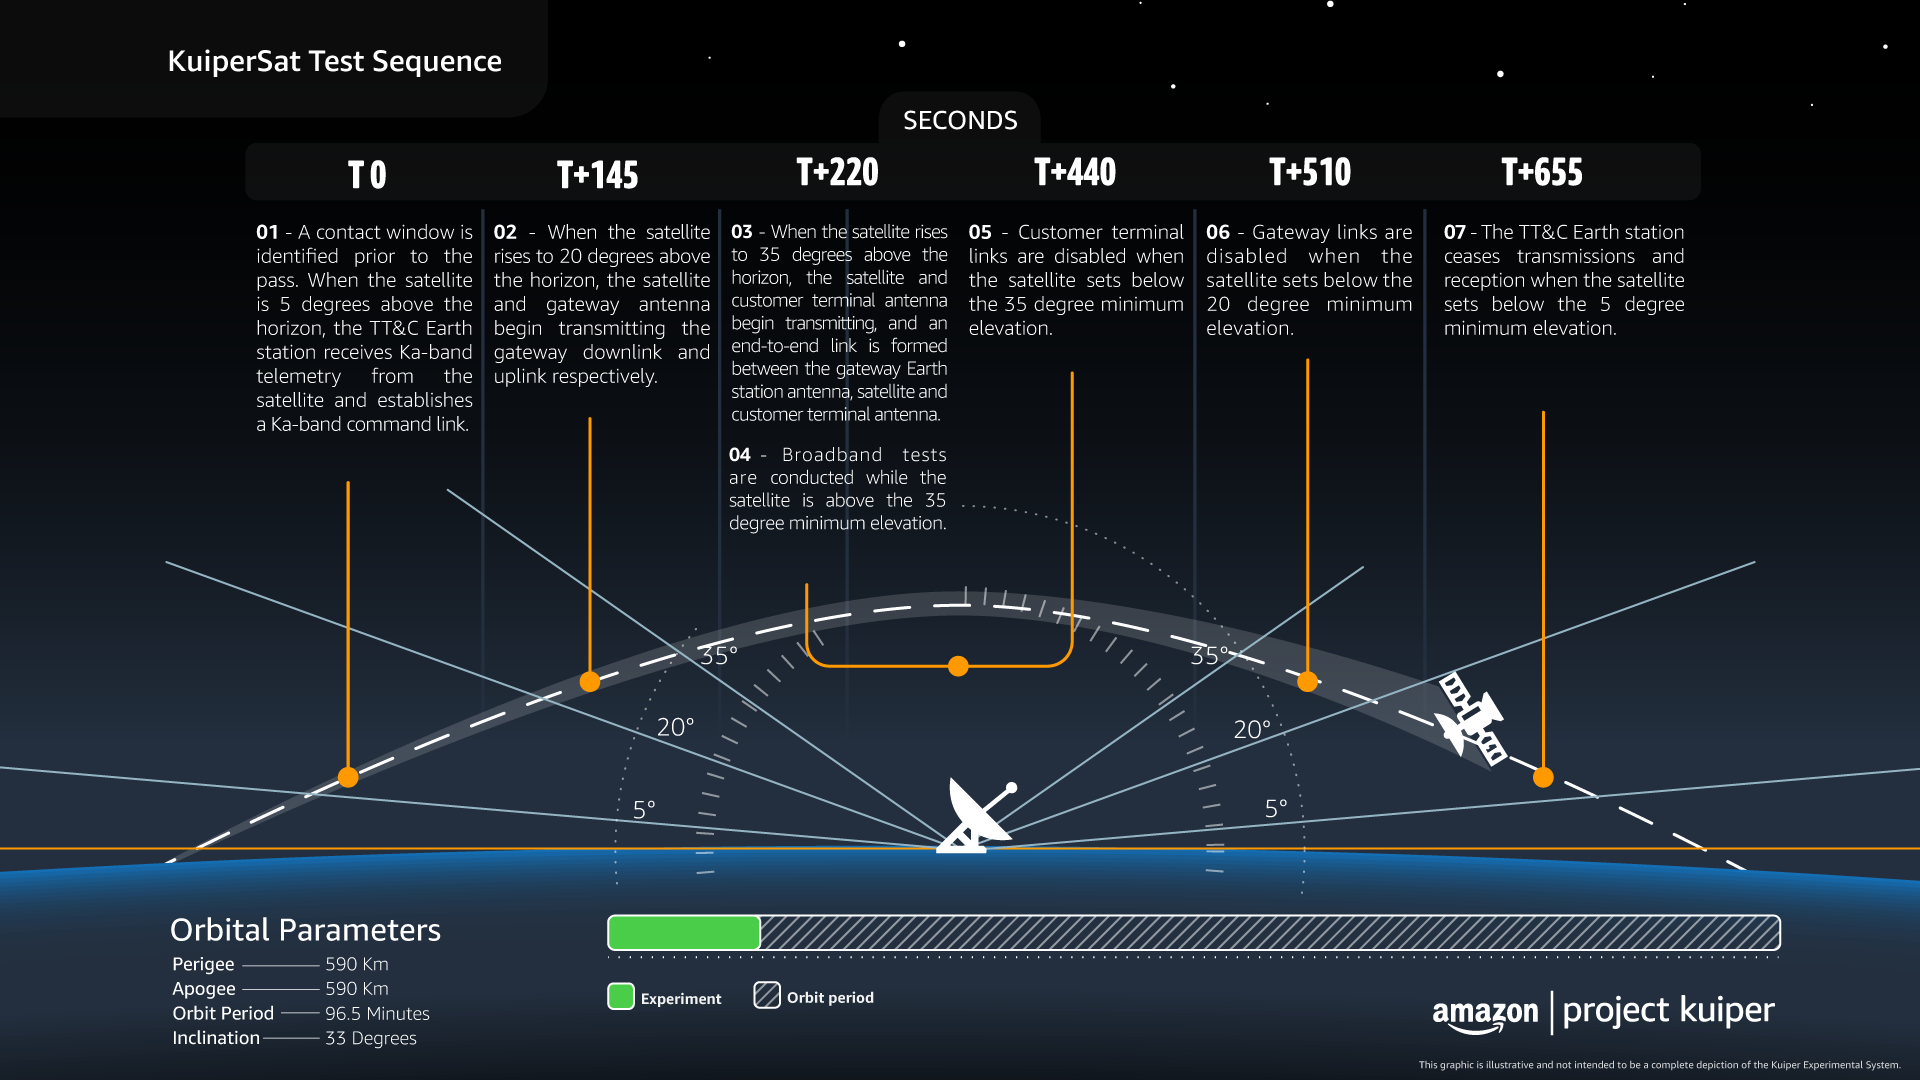 Amazon explains the test sequence for its prototype satellites.